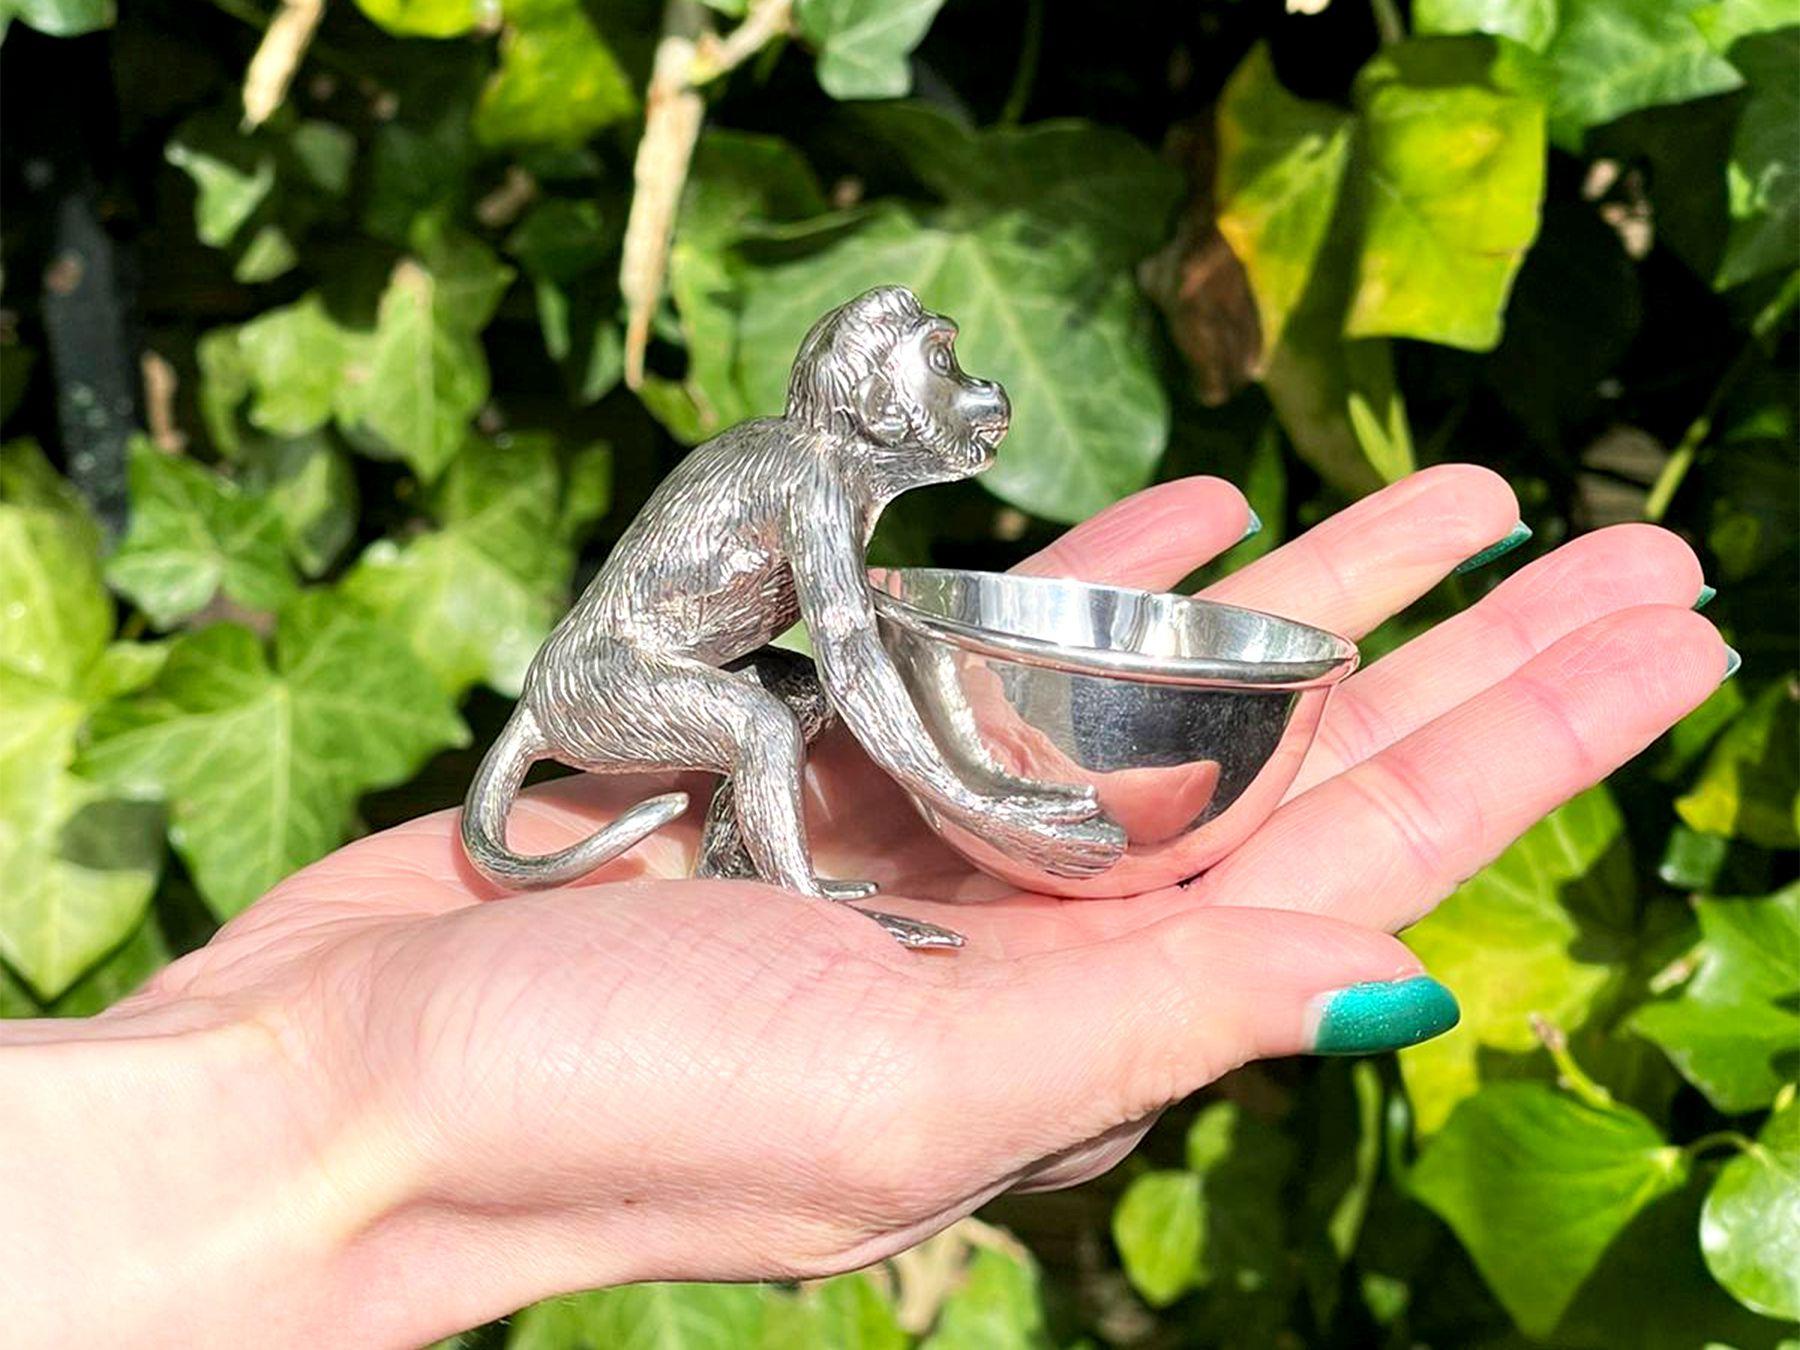 An exceptional, fine and impressive antique Victorian English cast sterling silver bowl modelled in the form of a monkey; an addition to our novelty silverware collection.

This exceptional antique Victorian cast sterling silver receptacle bowl